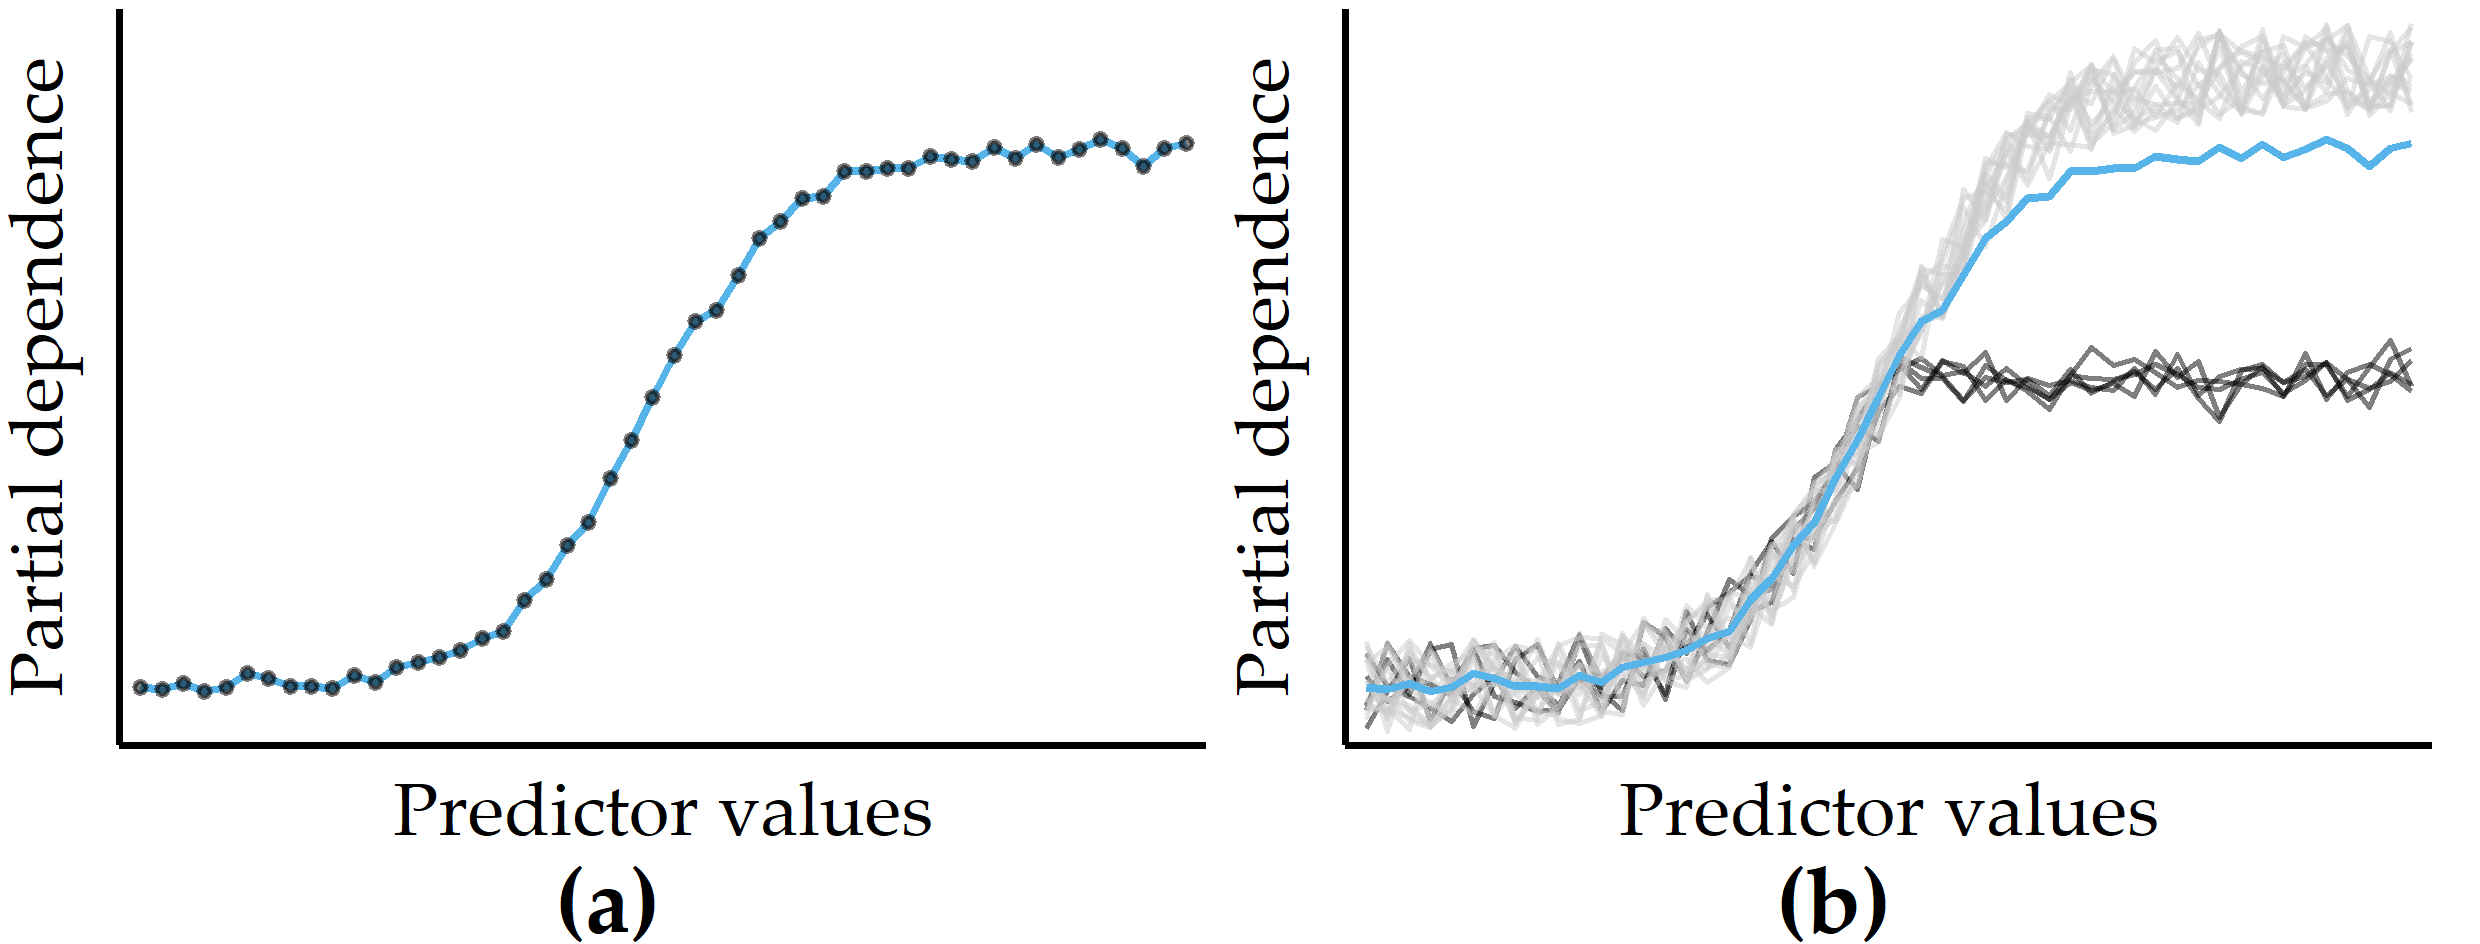 Illustrations of a partial dependence plot (PDP) and an individual conditional expectation (ICE) plot on artificial data. (a) PDP for a predictor on an artificial dataset. Points represent a sample of the predictor distribution. (b) PDP augmented with ICE curves. There are two distinct subsets of observations for which the PD is different in the upper half of the predictor distribution.